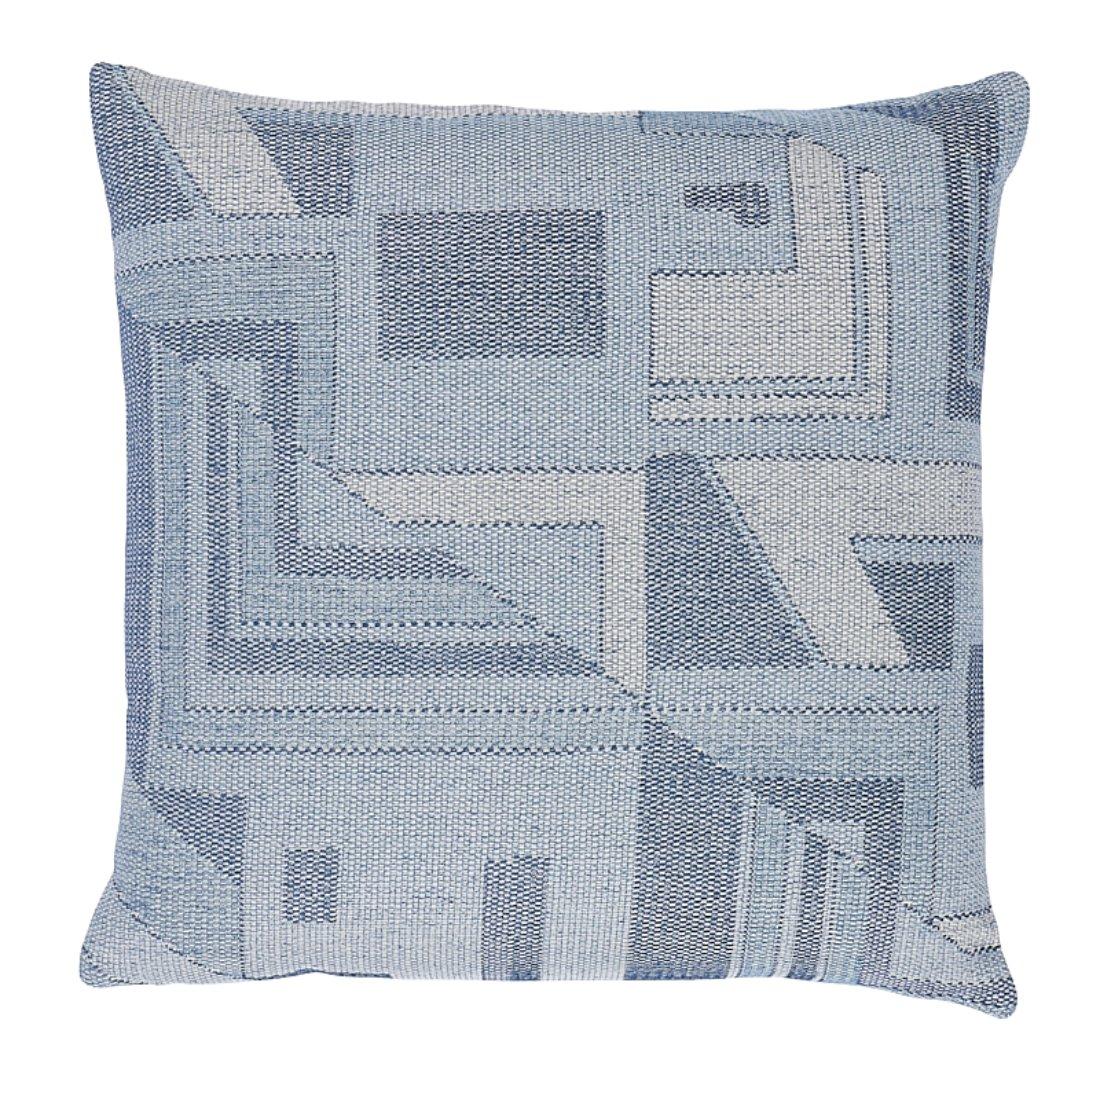 This pillow features Zsuzsa with a knife edge finish. A remarkable weave of flat and fluffy chenille yarns, Zsuzsa in chambray is a large-scale, deconstructed geometric pattern created through tone and texture. It is a subtle yet compelling